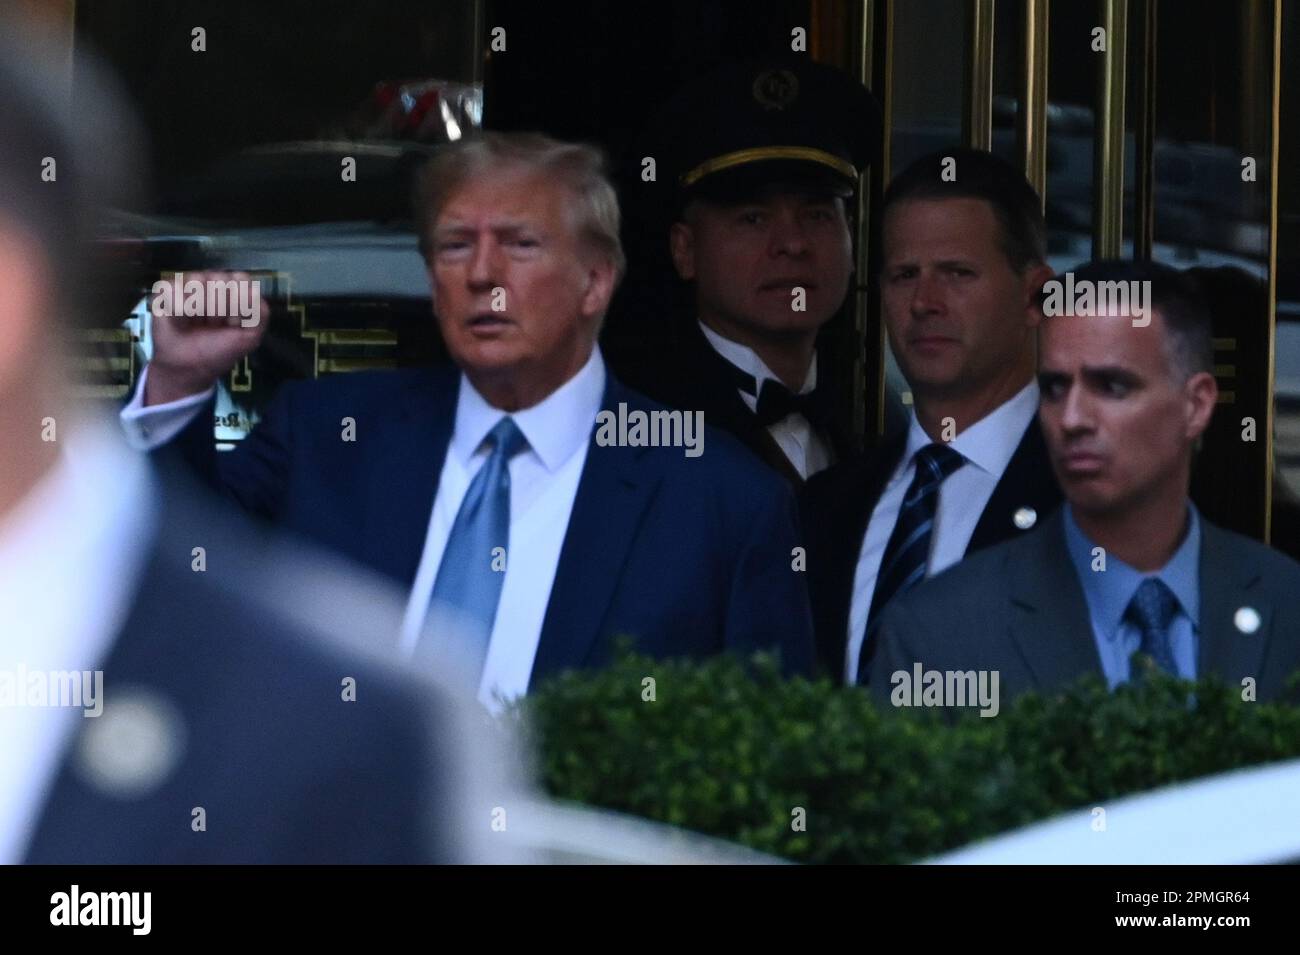 Former U.S. President Donald Trump seen leaving his residence for a deposition hearing with New York State Attorney General Letitia James, New York, NY, April 13, 2023.  The scheduled deposition in a business fraud lawsuit filed by New York State Attorney General is separate from the criminal case involving hush-money payments made during his 2106 Presidential campaign. (Photo by Anthony Behar/Sipa USA) Stock Photo